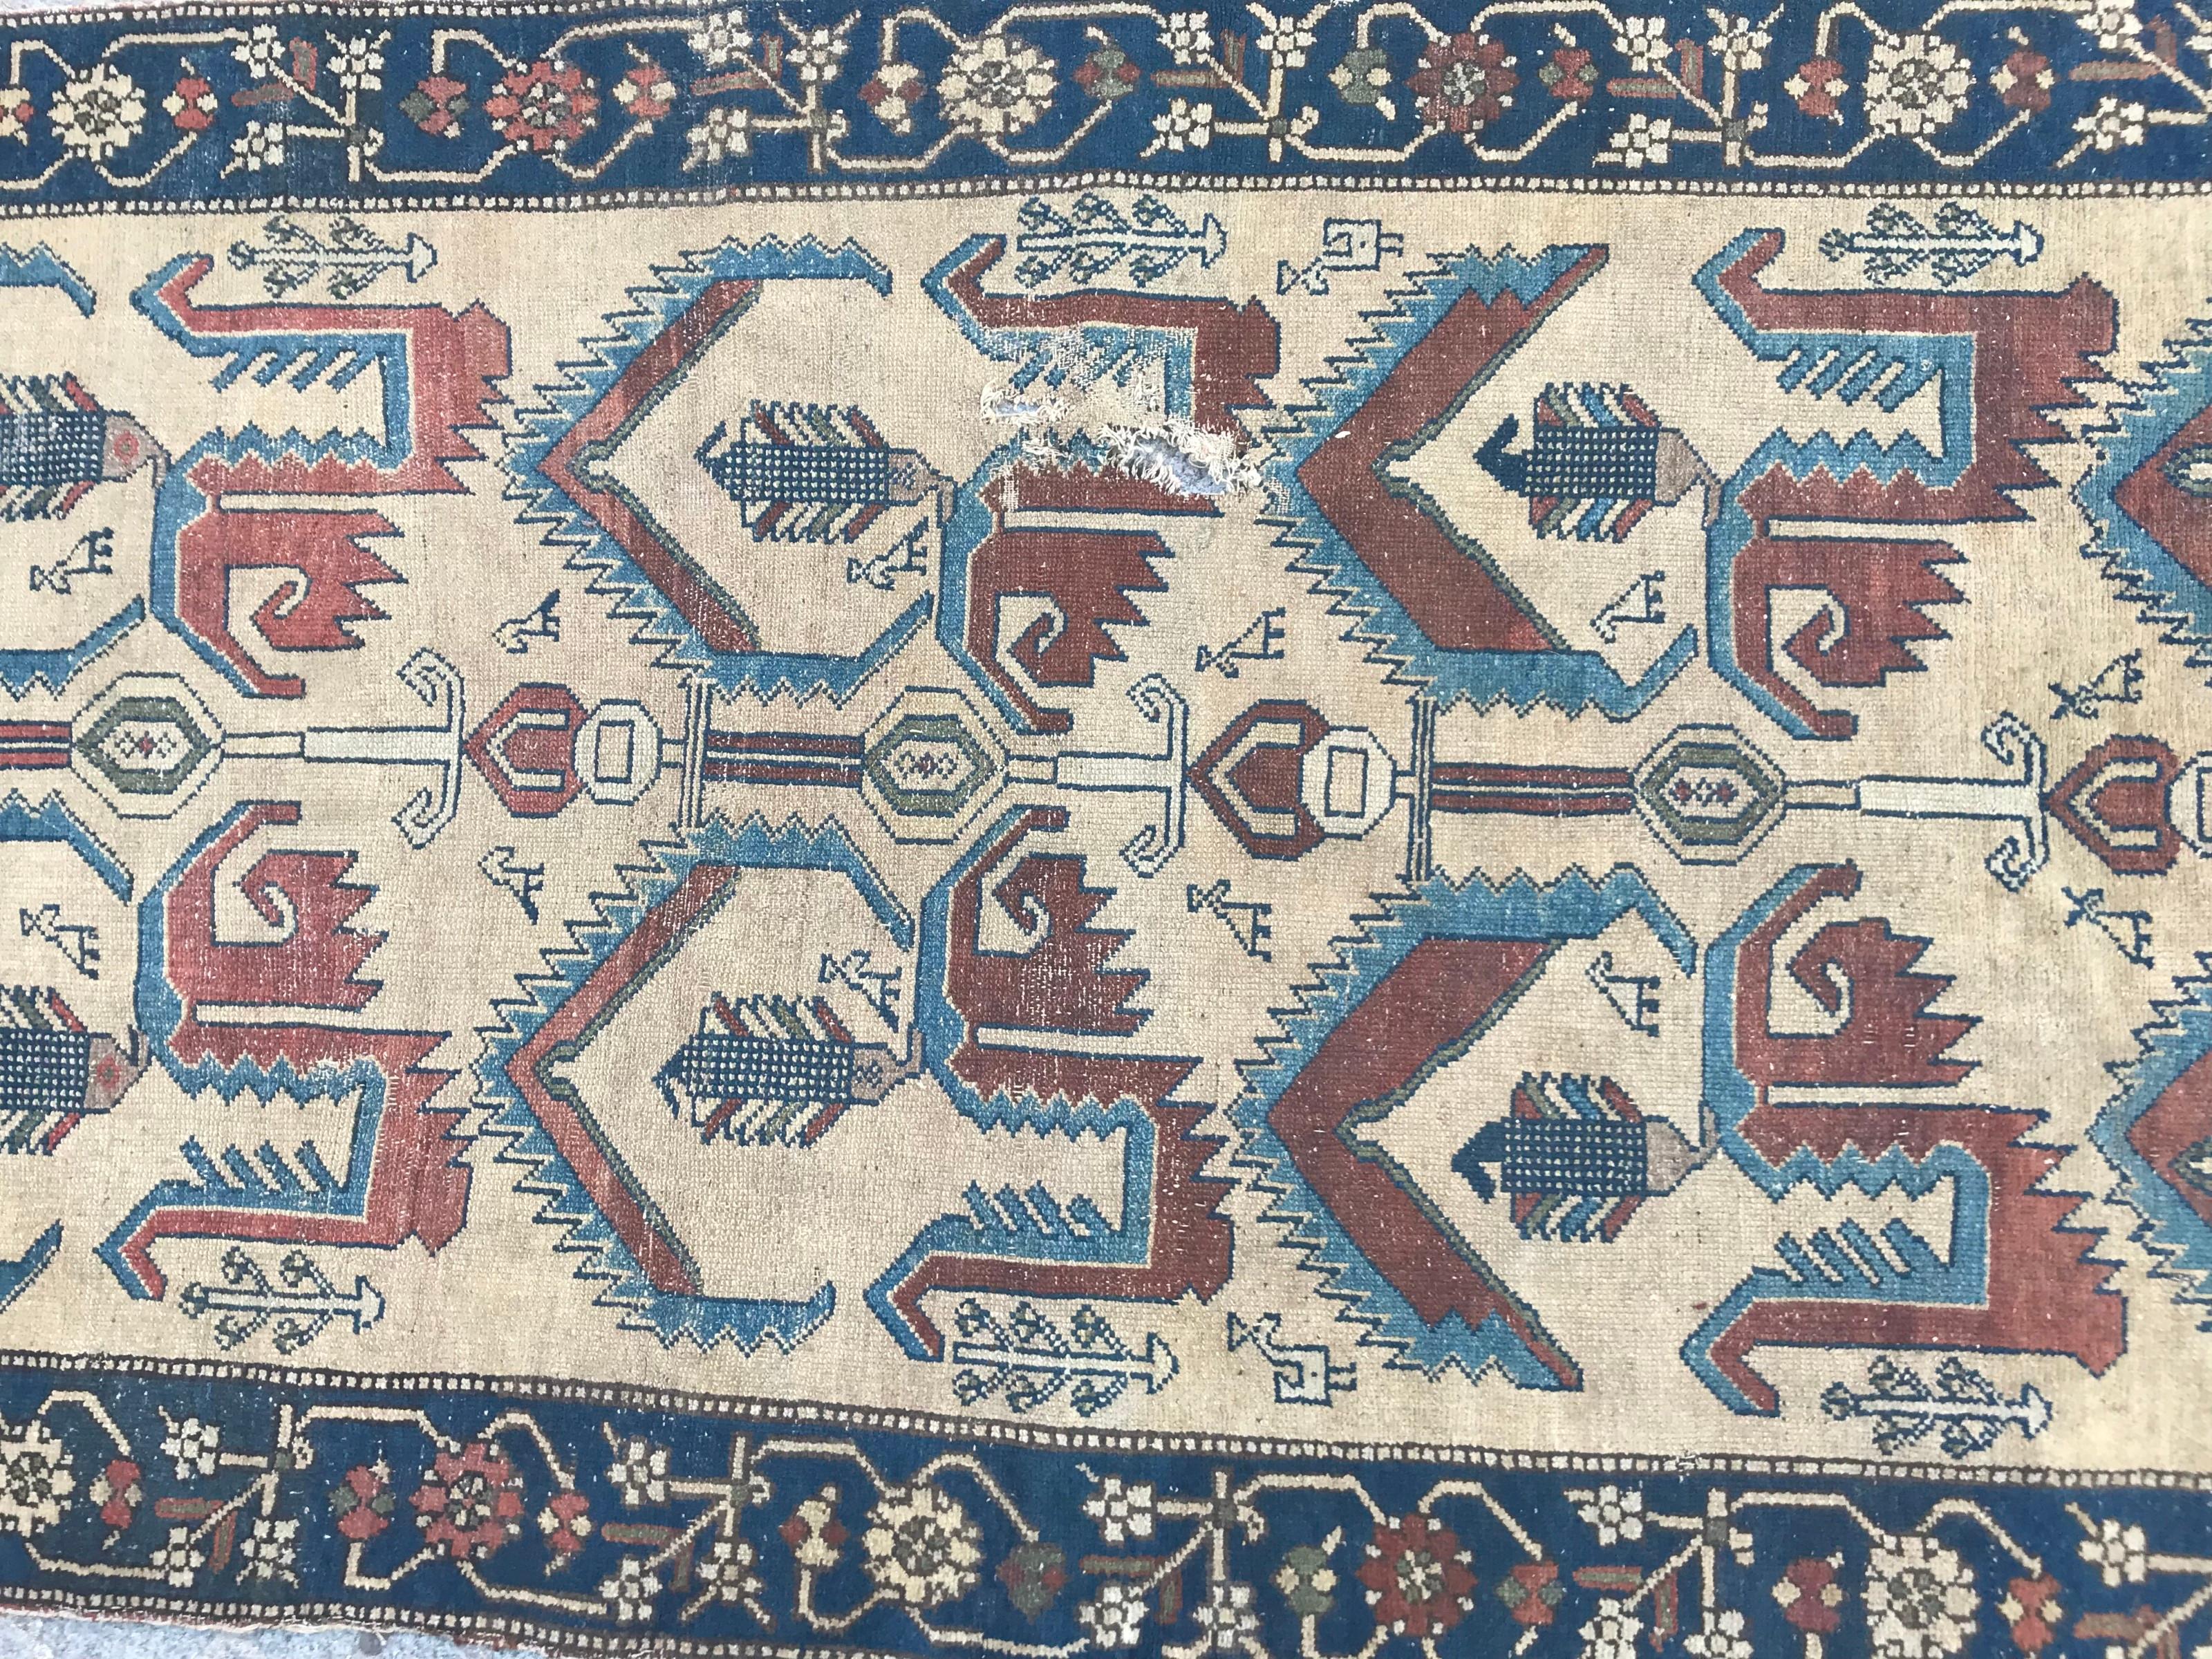 Very decorative and unusual 19th century rug from North West, with natural light colors, wool velvet on cotton foundation.